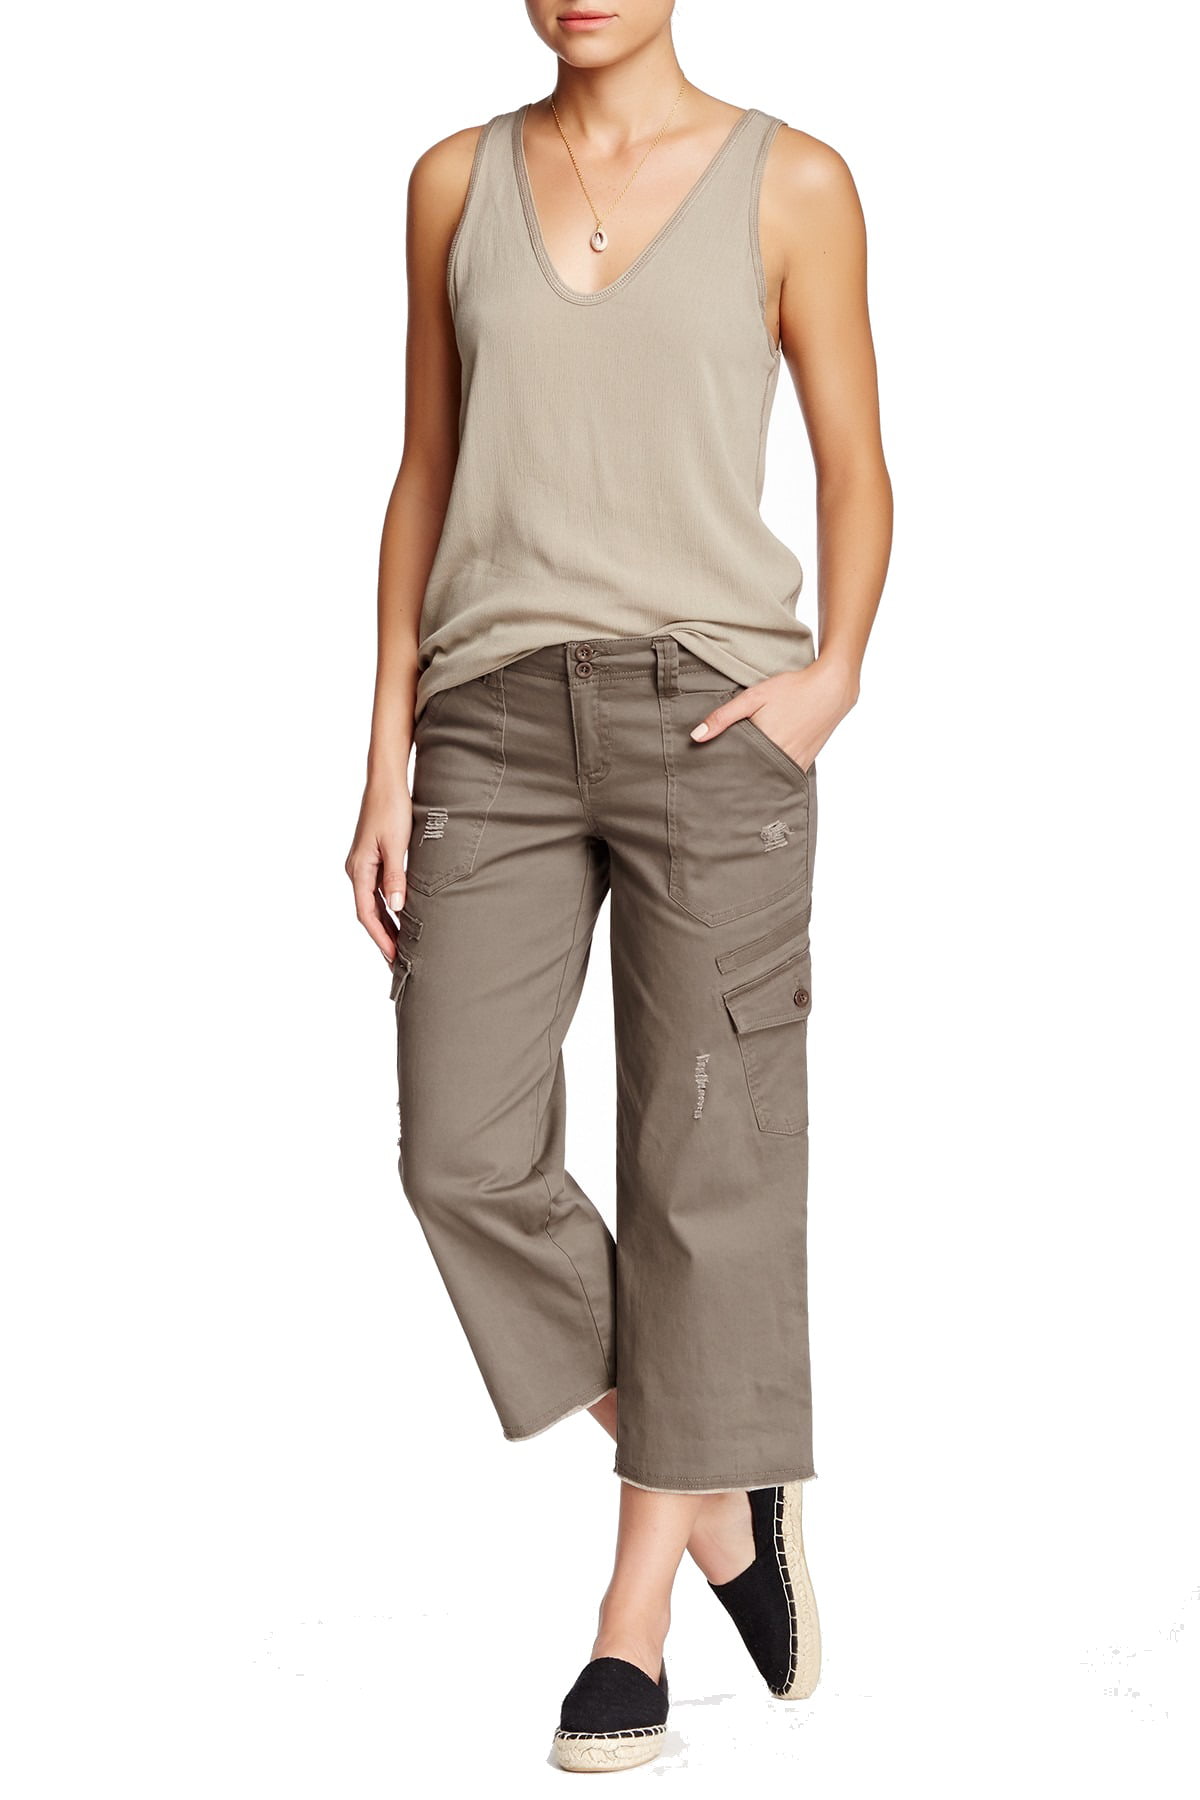 A woman in a pair of olive green cropped cargo pants.